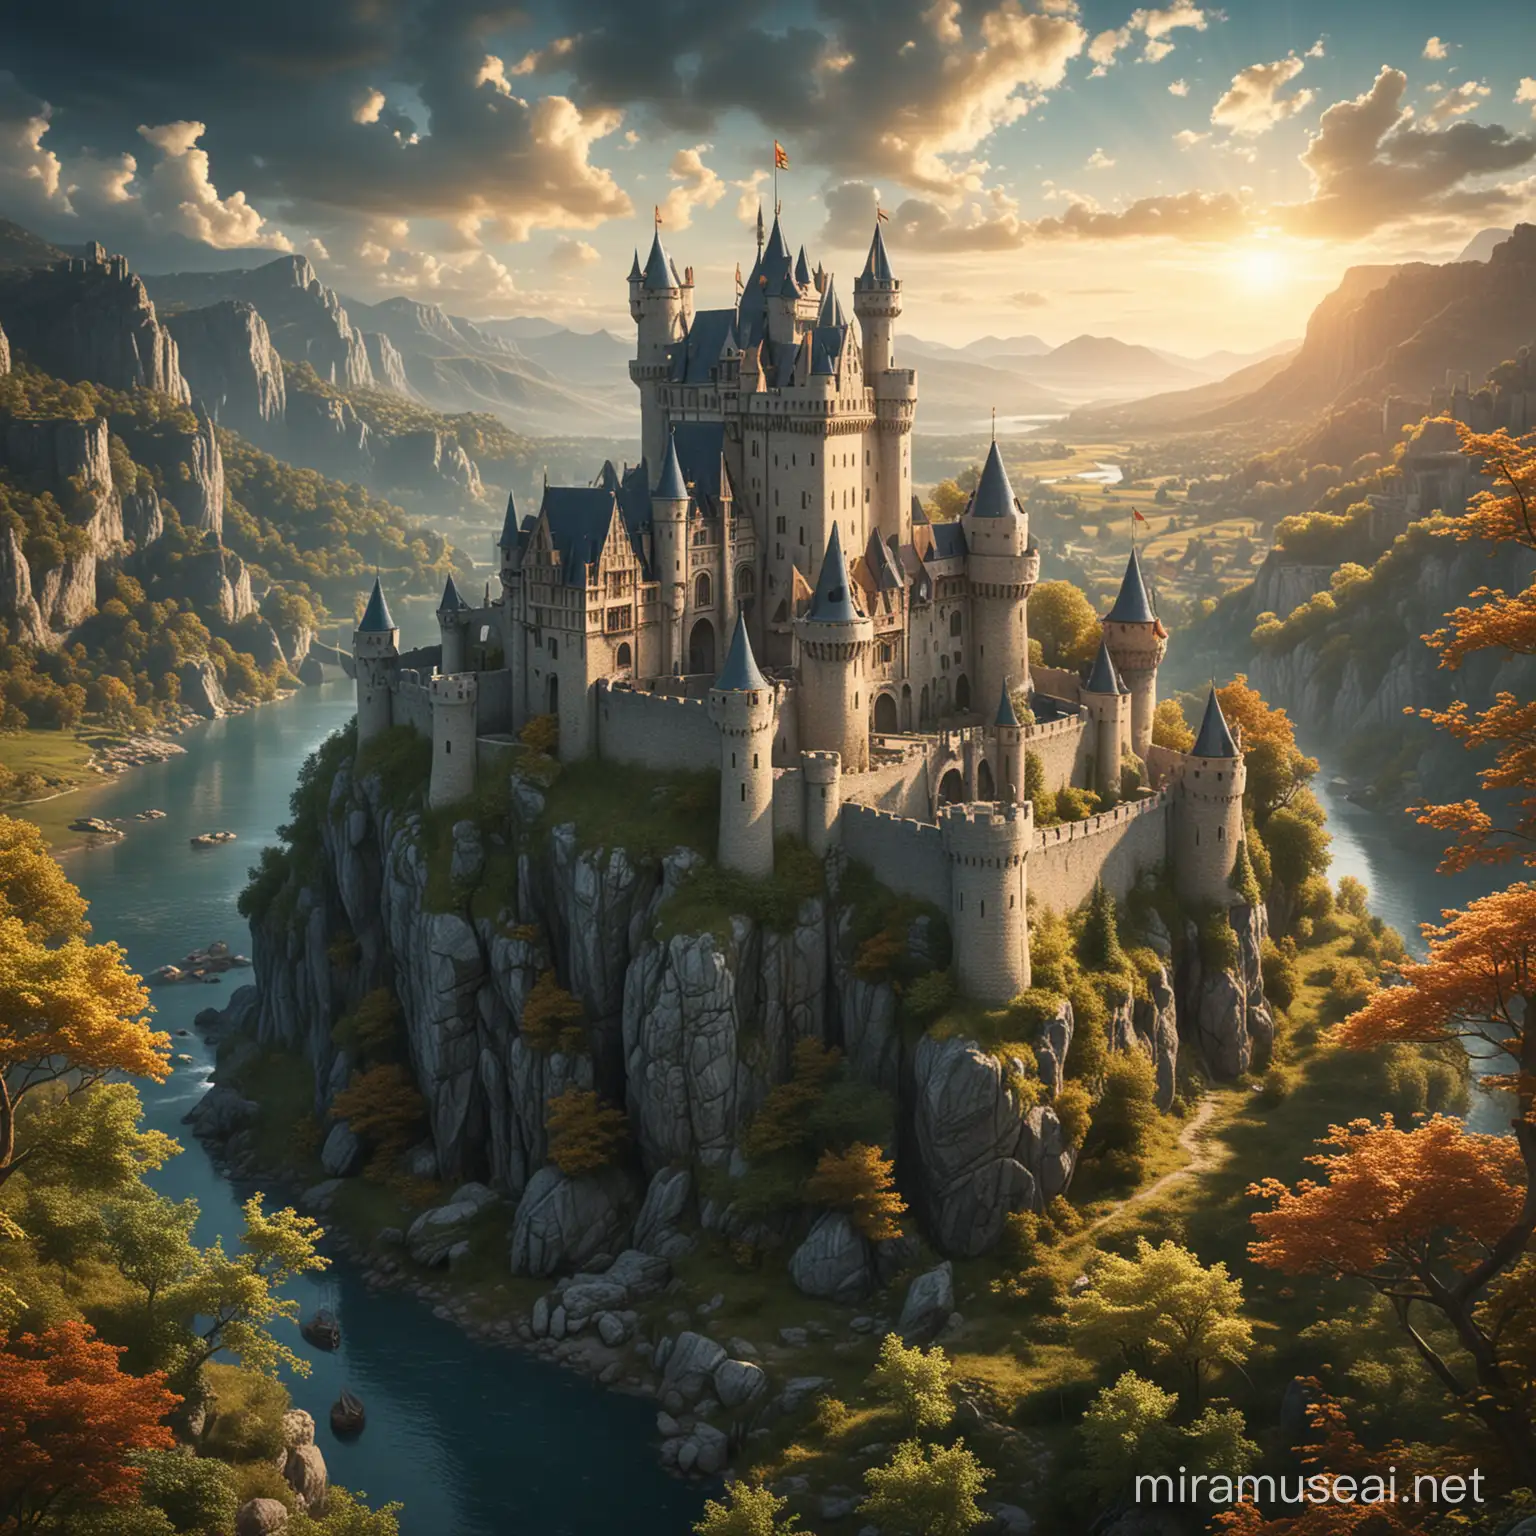 Enchanting Medieval Castle in a Magical Kingdom